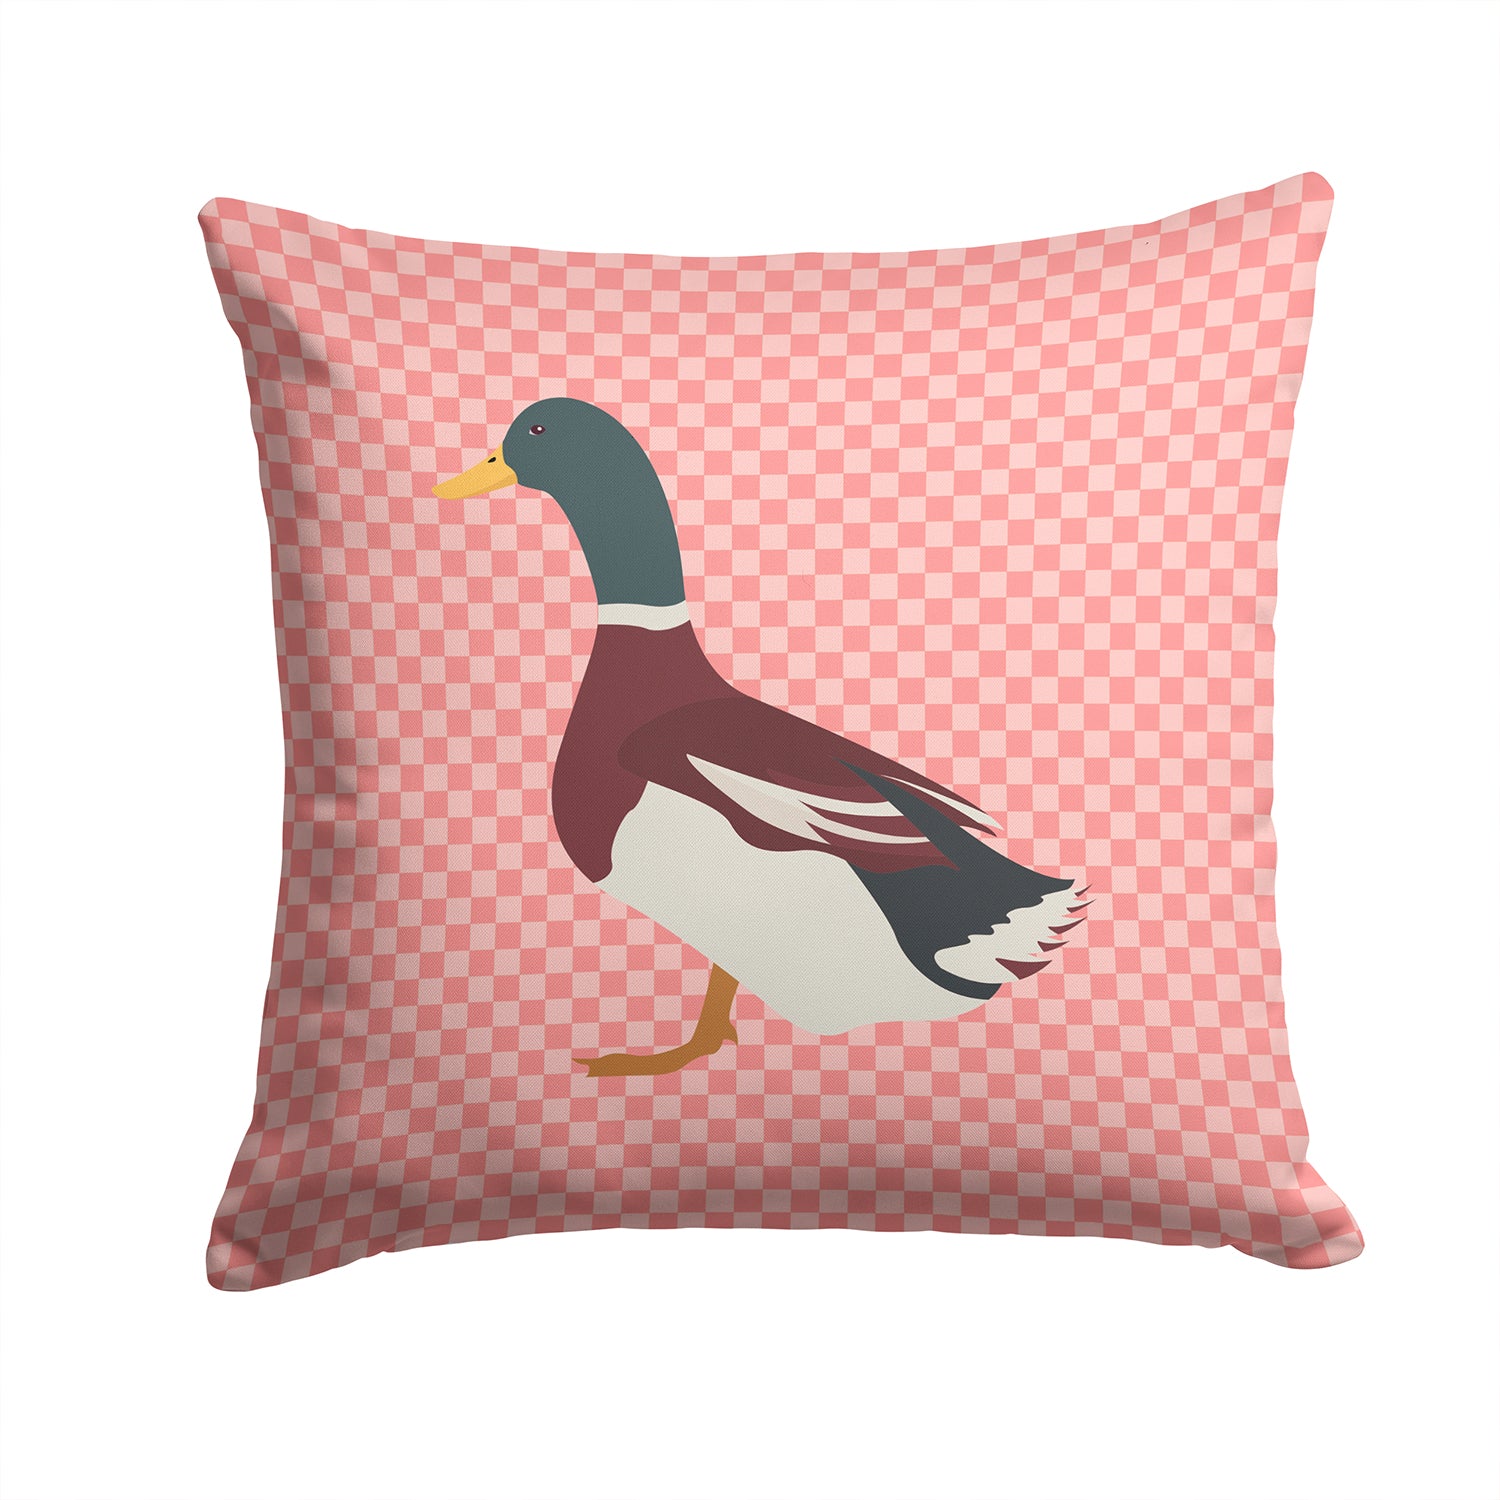 Rouen Duck Pink Check Fabric Decorative Pillow BB7856PW1414 - the-store.com